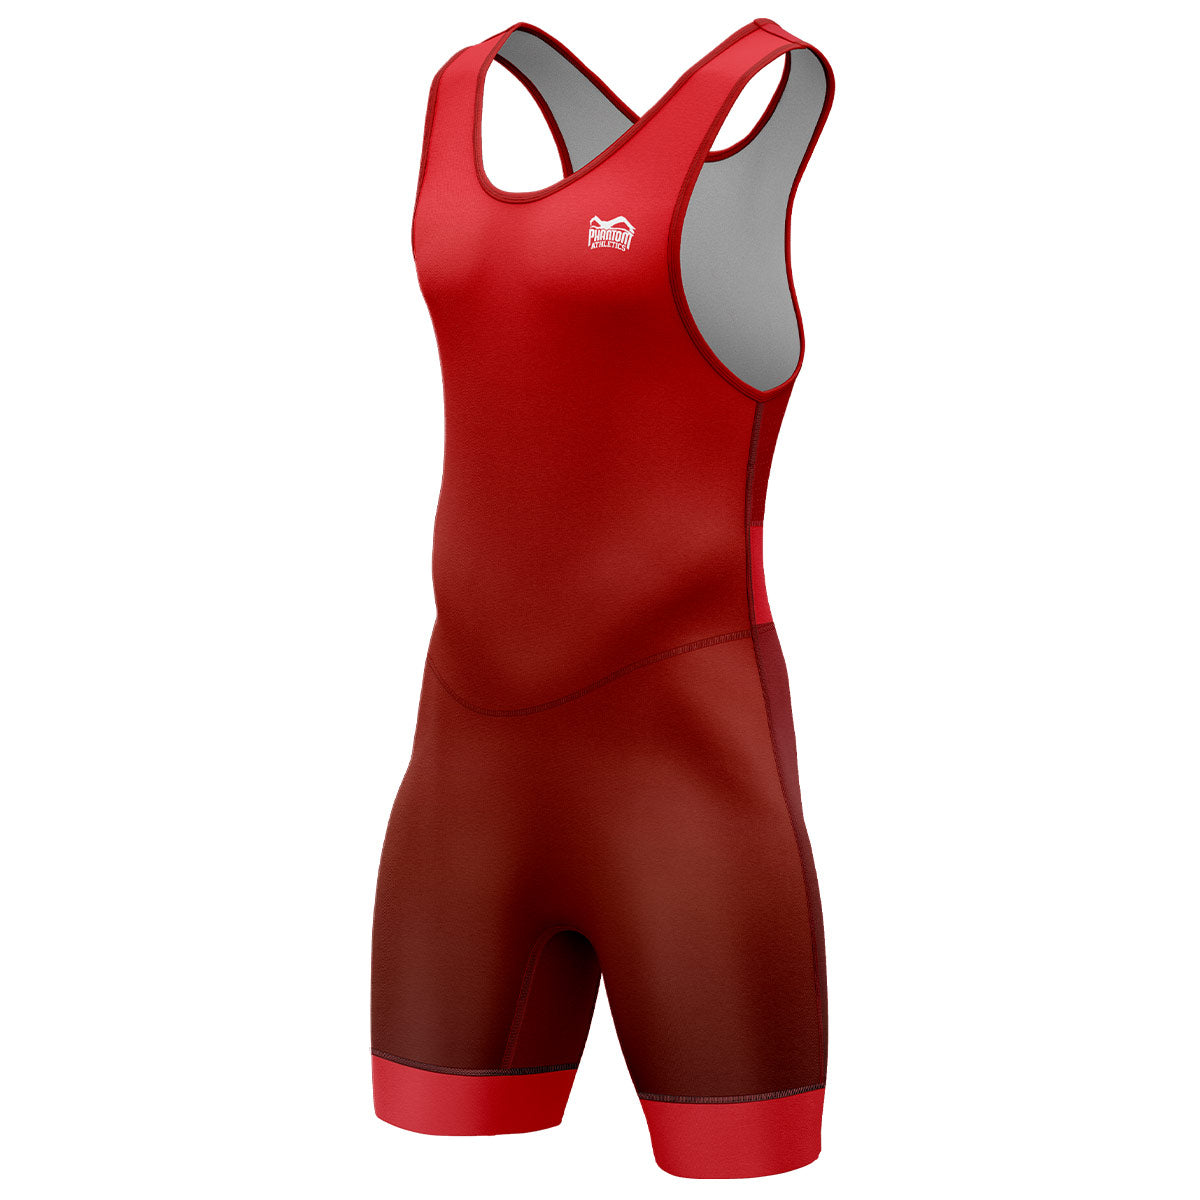 Phantom wrestling jersey Apex in the color red. Ideal for training and competition. Manufactured according to official UWW guidelines.